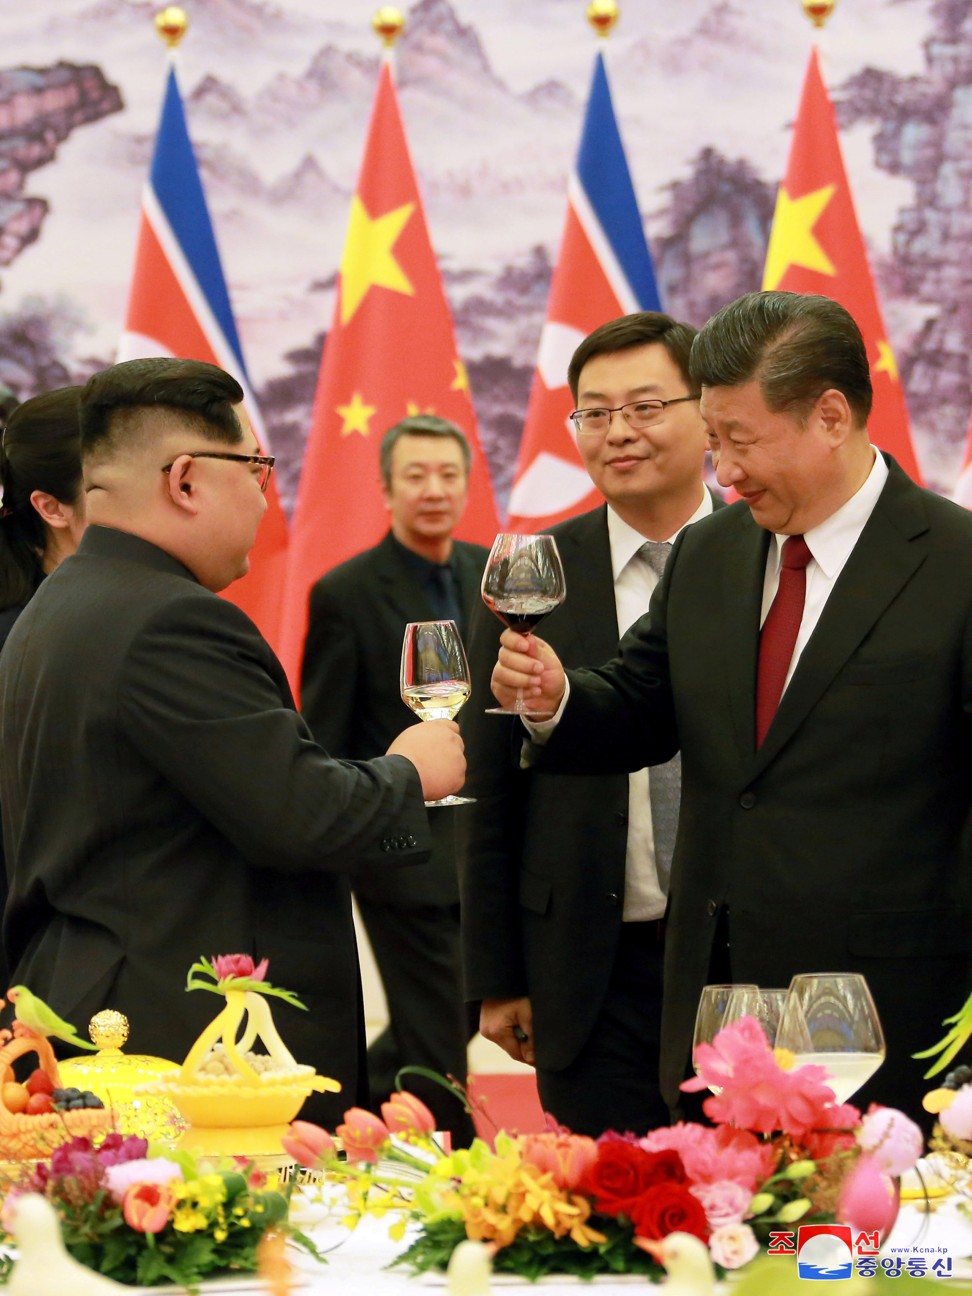 Analysts said the meeting of the two leaders provided clear evidence of the nations’ alliance ahead of Kim’s planned summit with US President Donald Trump. Photo: Reuters.